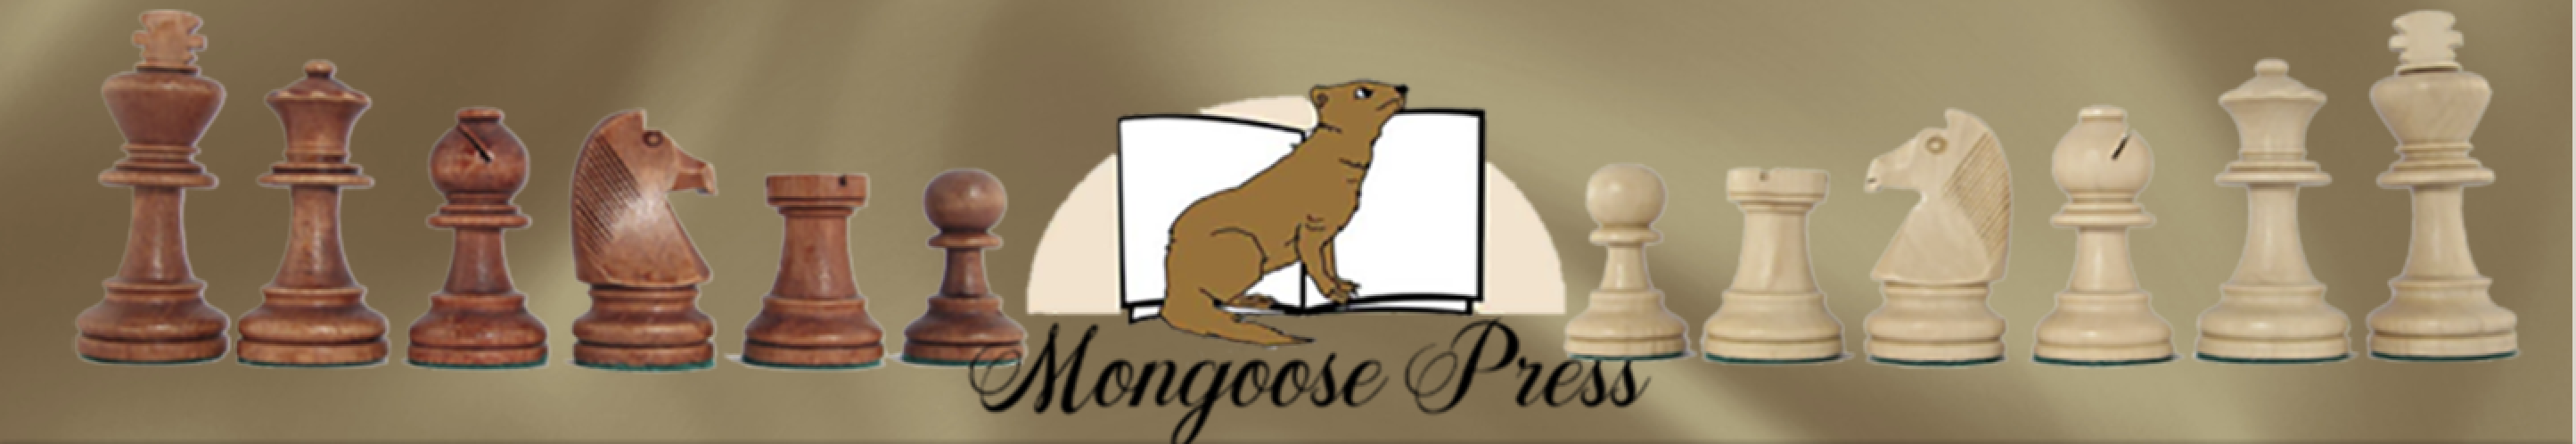 Openings for Amateurs – Mongoose Press